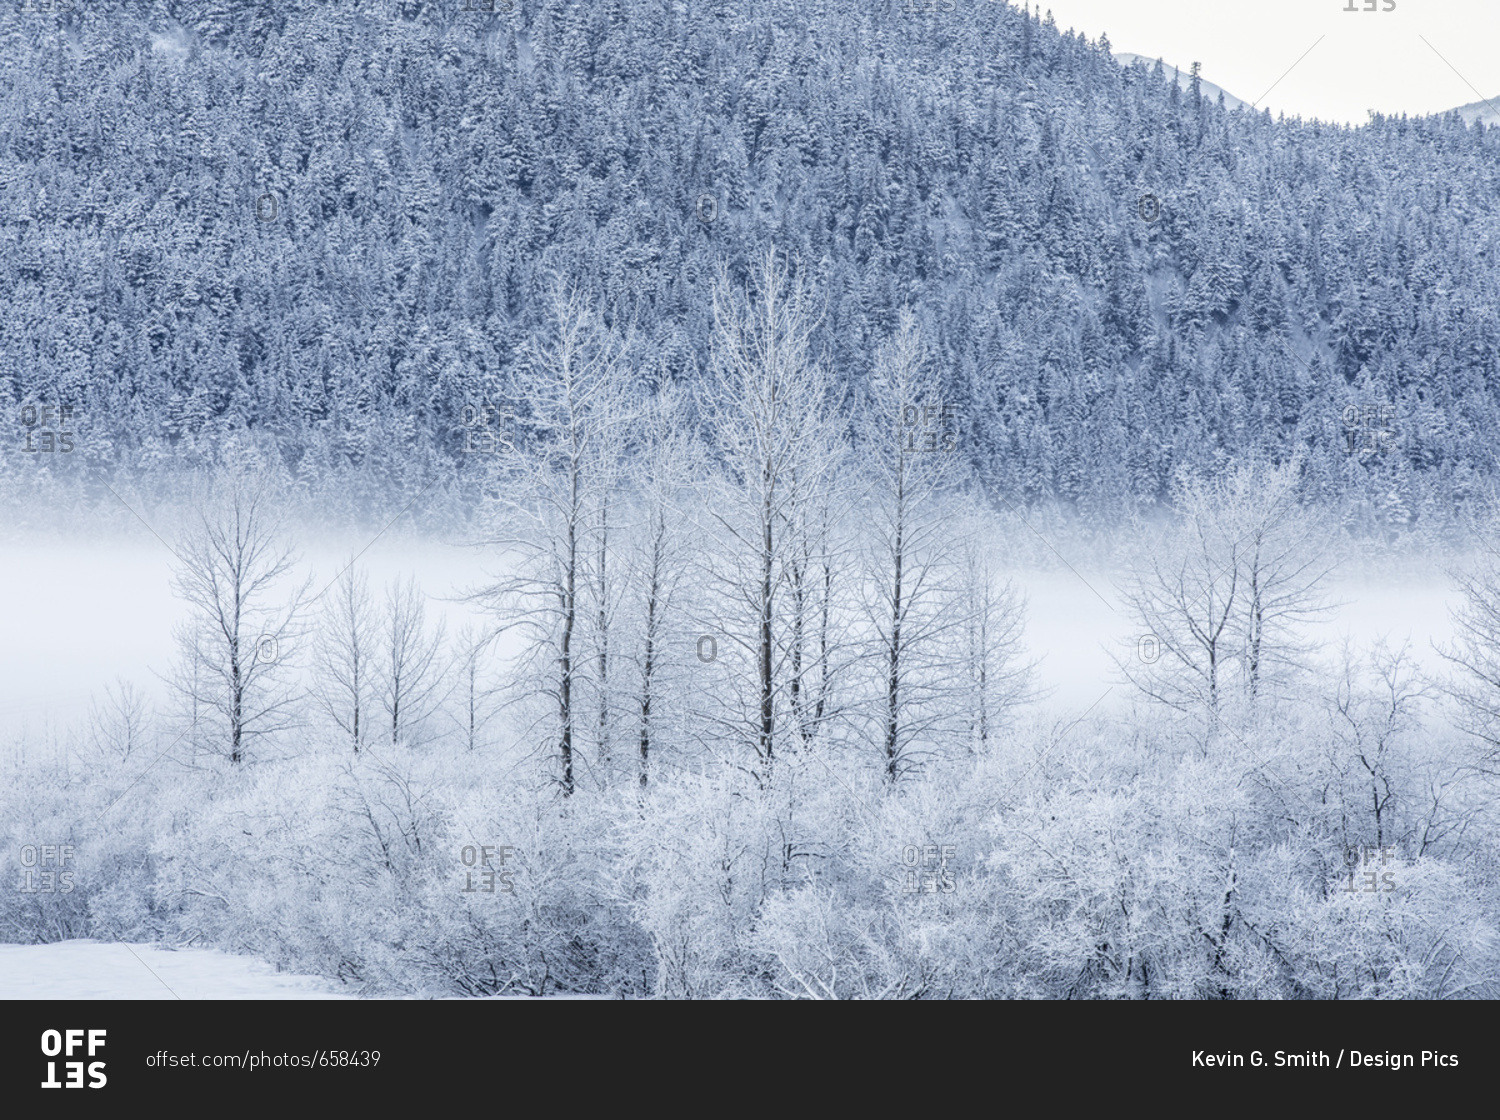 Hoar frost covers birch trees in a wintery landscape with a hillside of evergreen trees in the background, Seward Highway, South-central Alaska; Portage, Alaska, United States of America